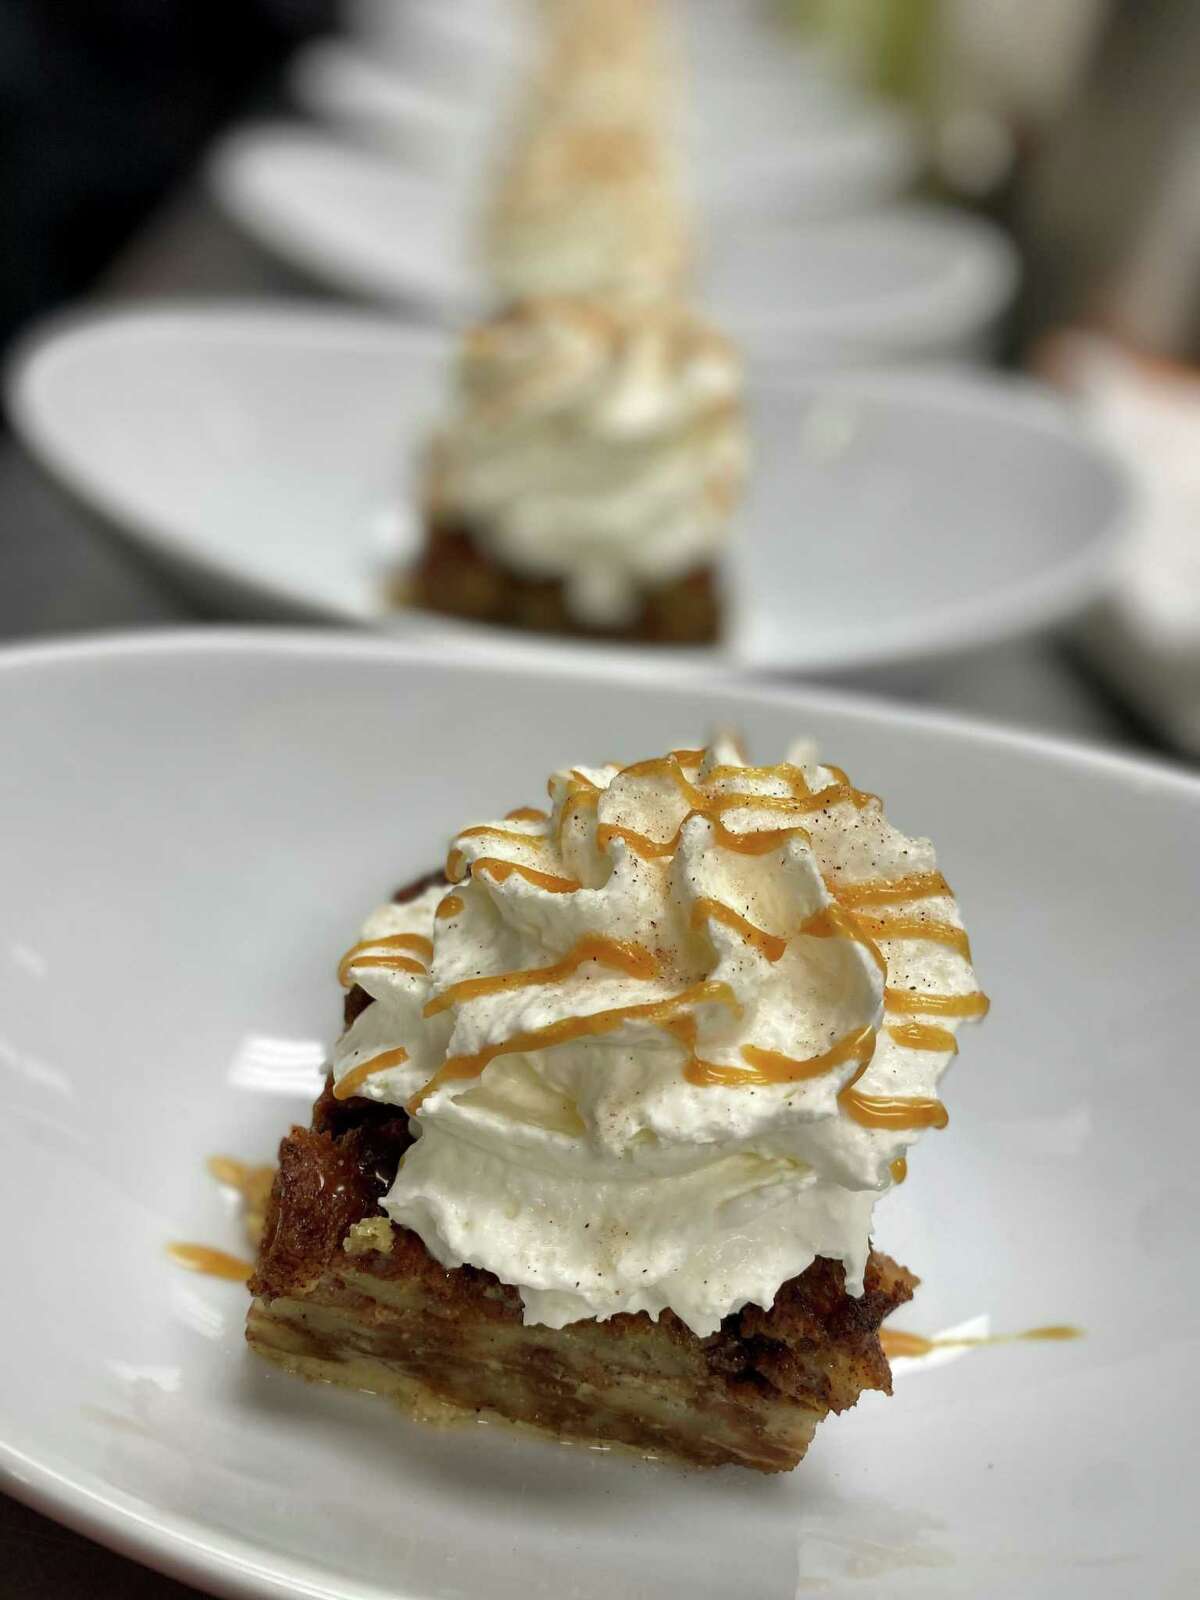 Churro bread pudding with horchata whipped cream is one of the dessert dishes at Stix & Stone.